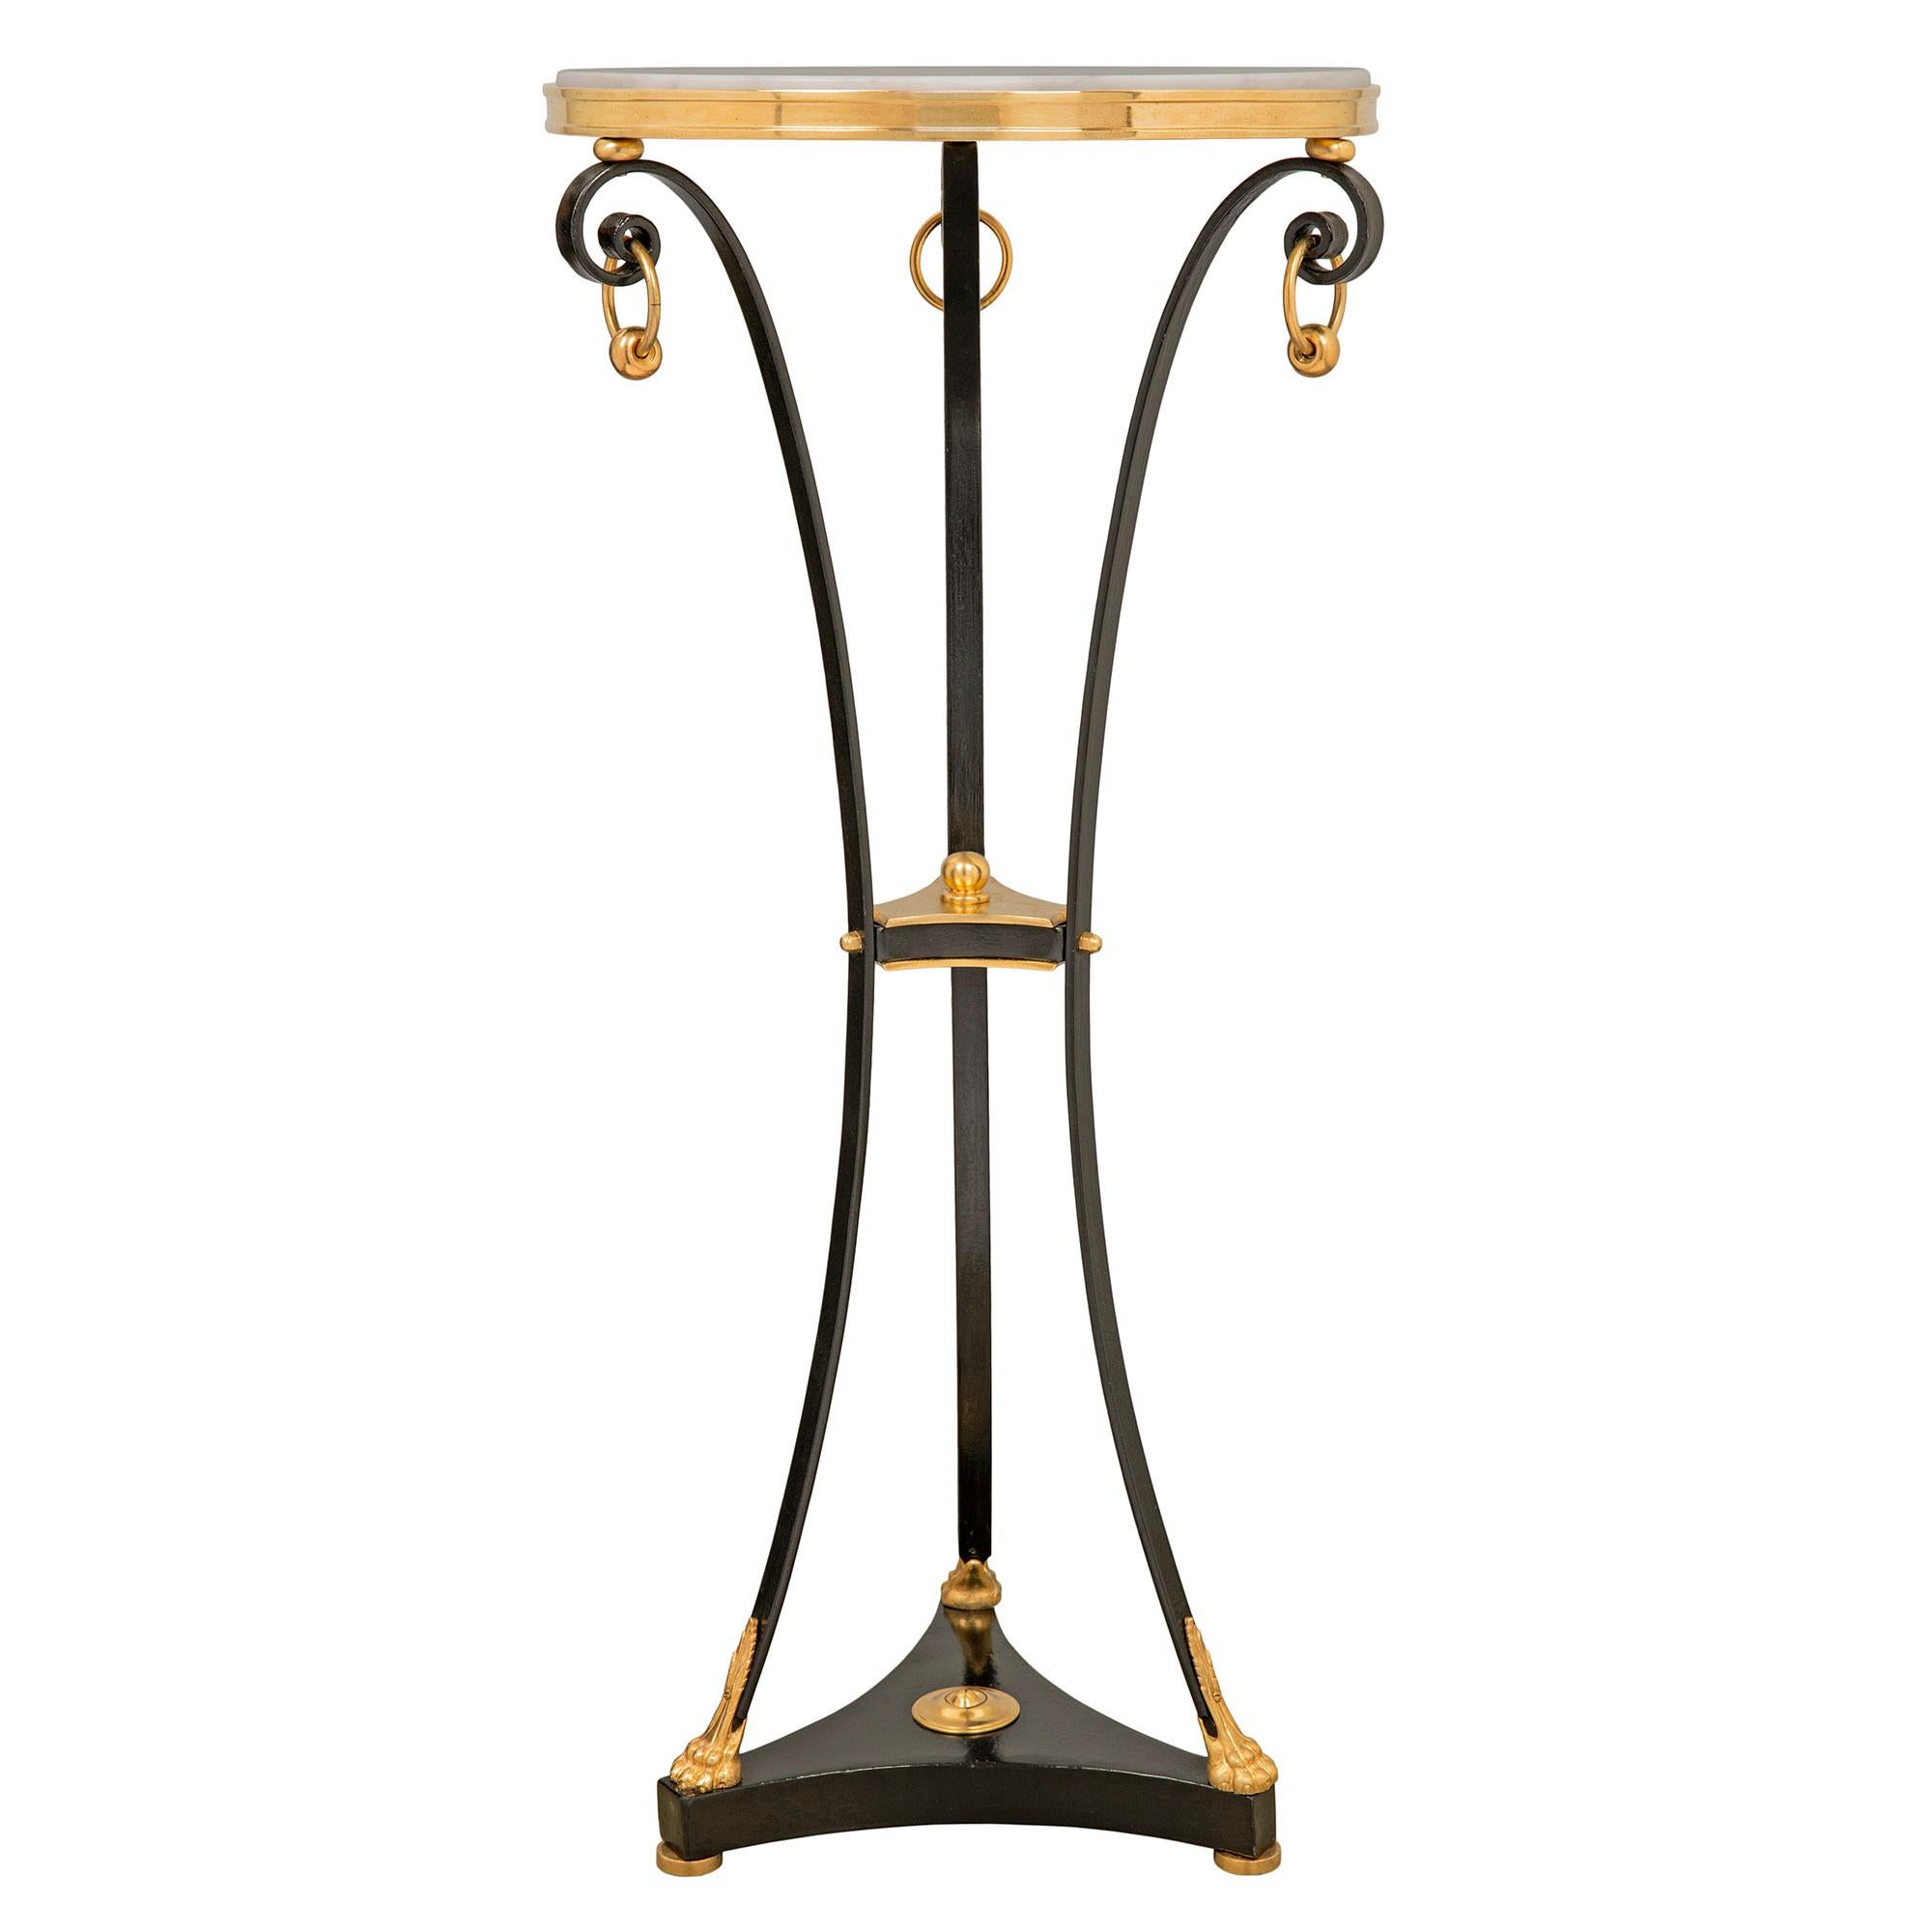 Patinated Pair of French Louis XVI Style Bronze, Ormolu and Marble Gueridon Side Tables